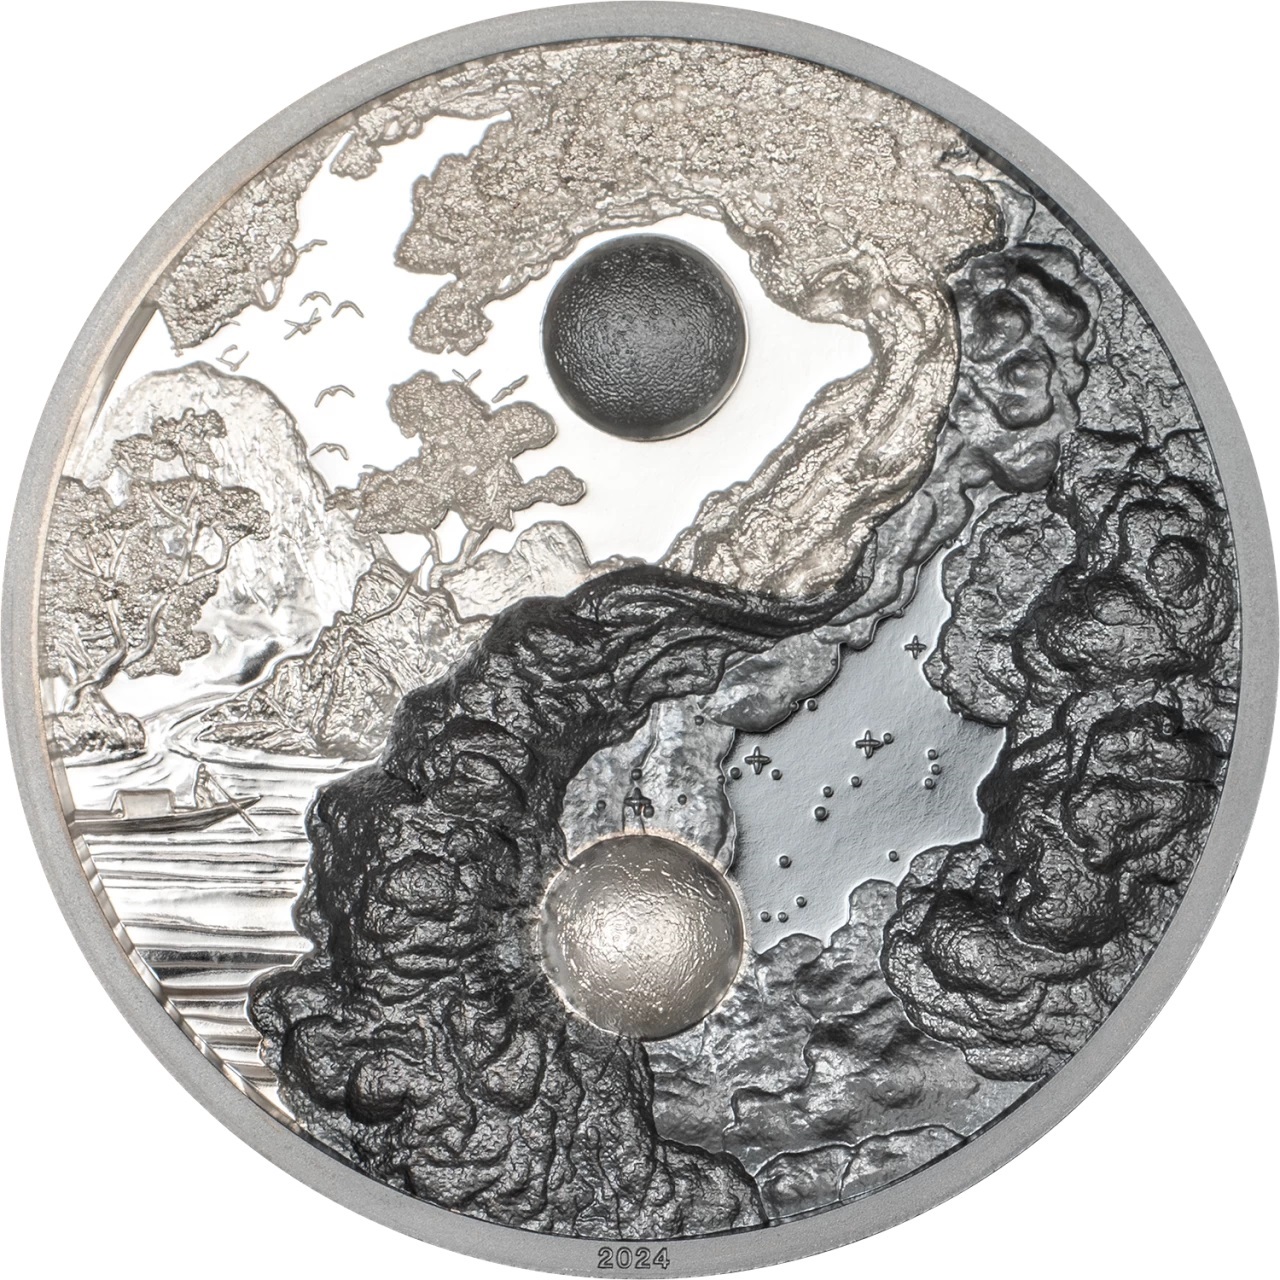 (W168.1.5.D..2024.30777) Palau 5 Dollars Yin and Yang 2024 - Black Proof silver Reverse (zoom)